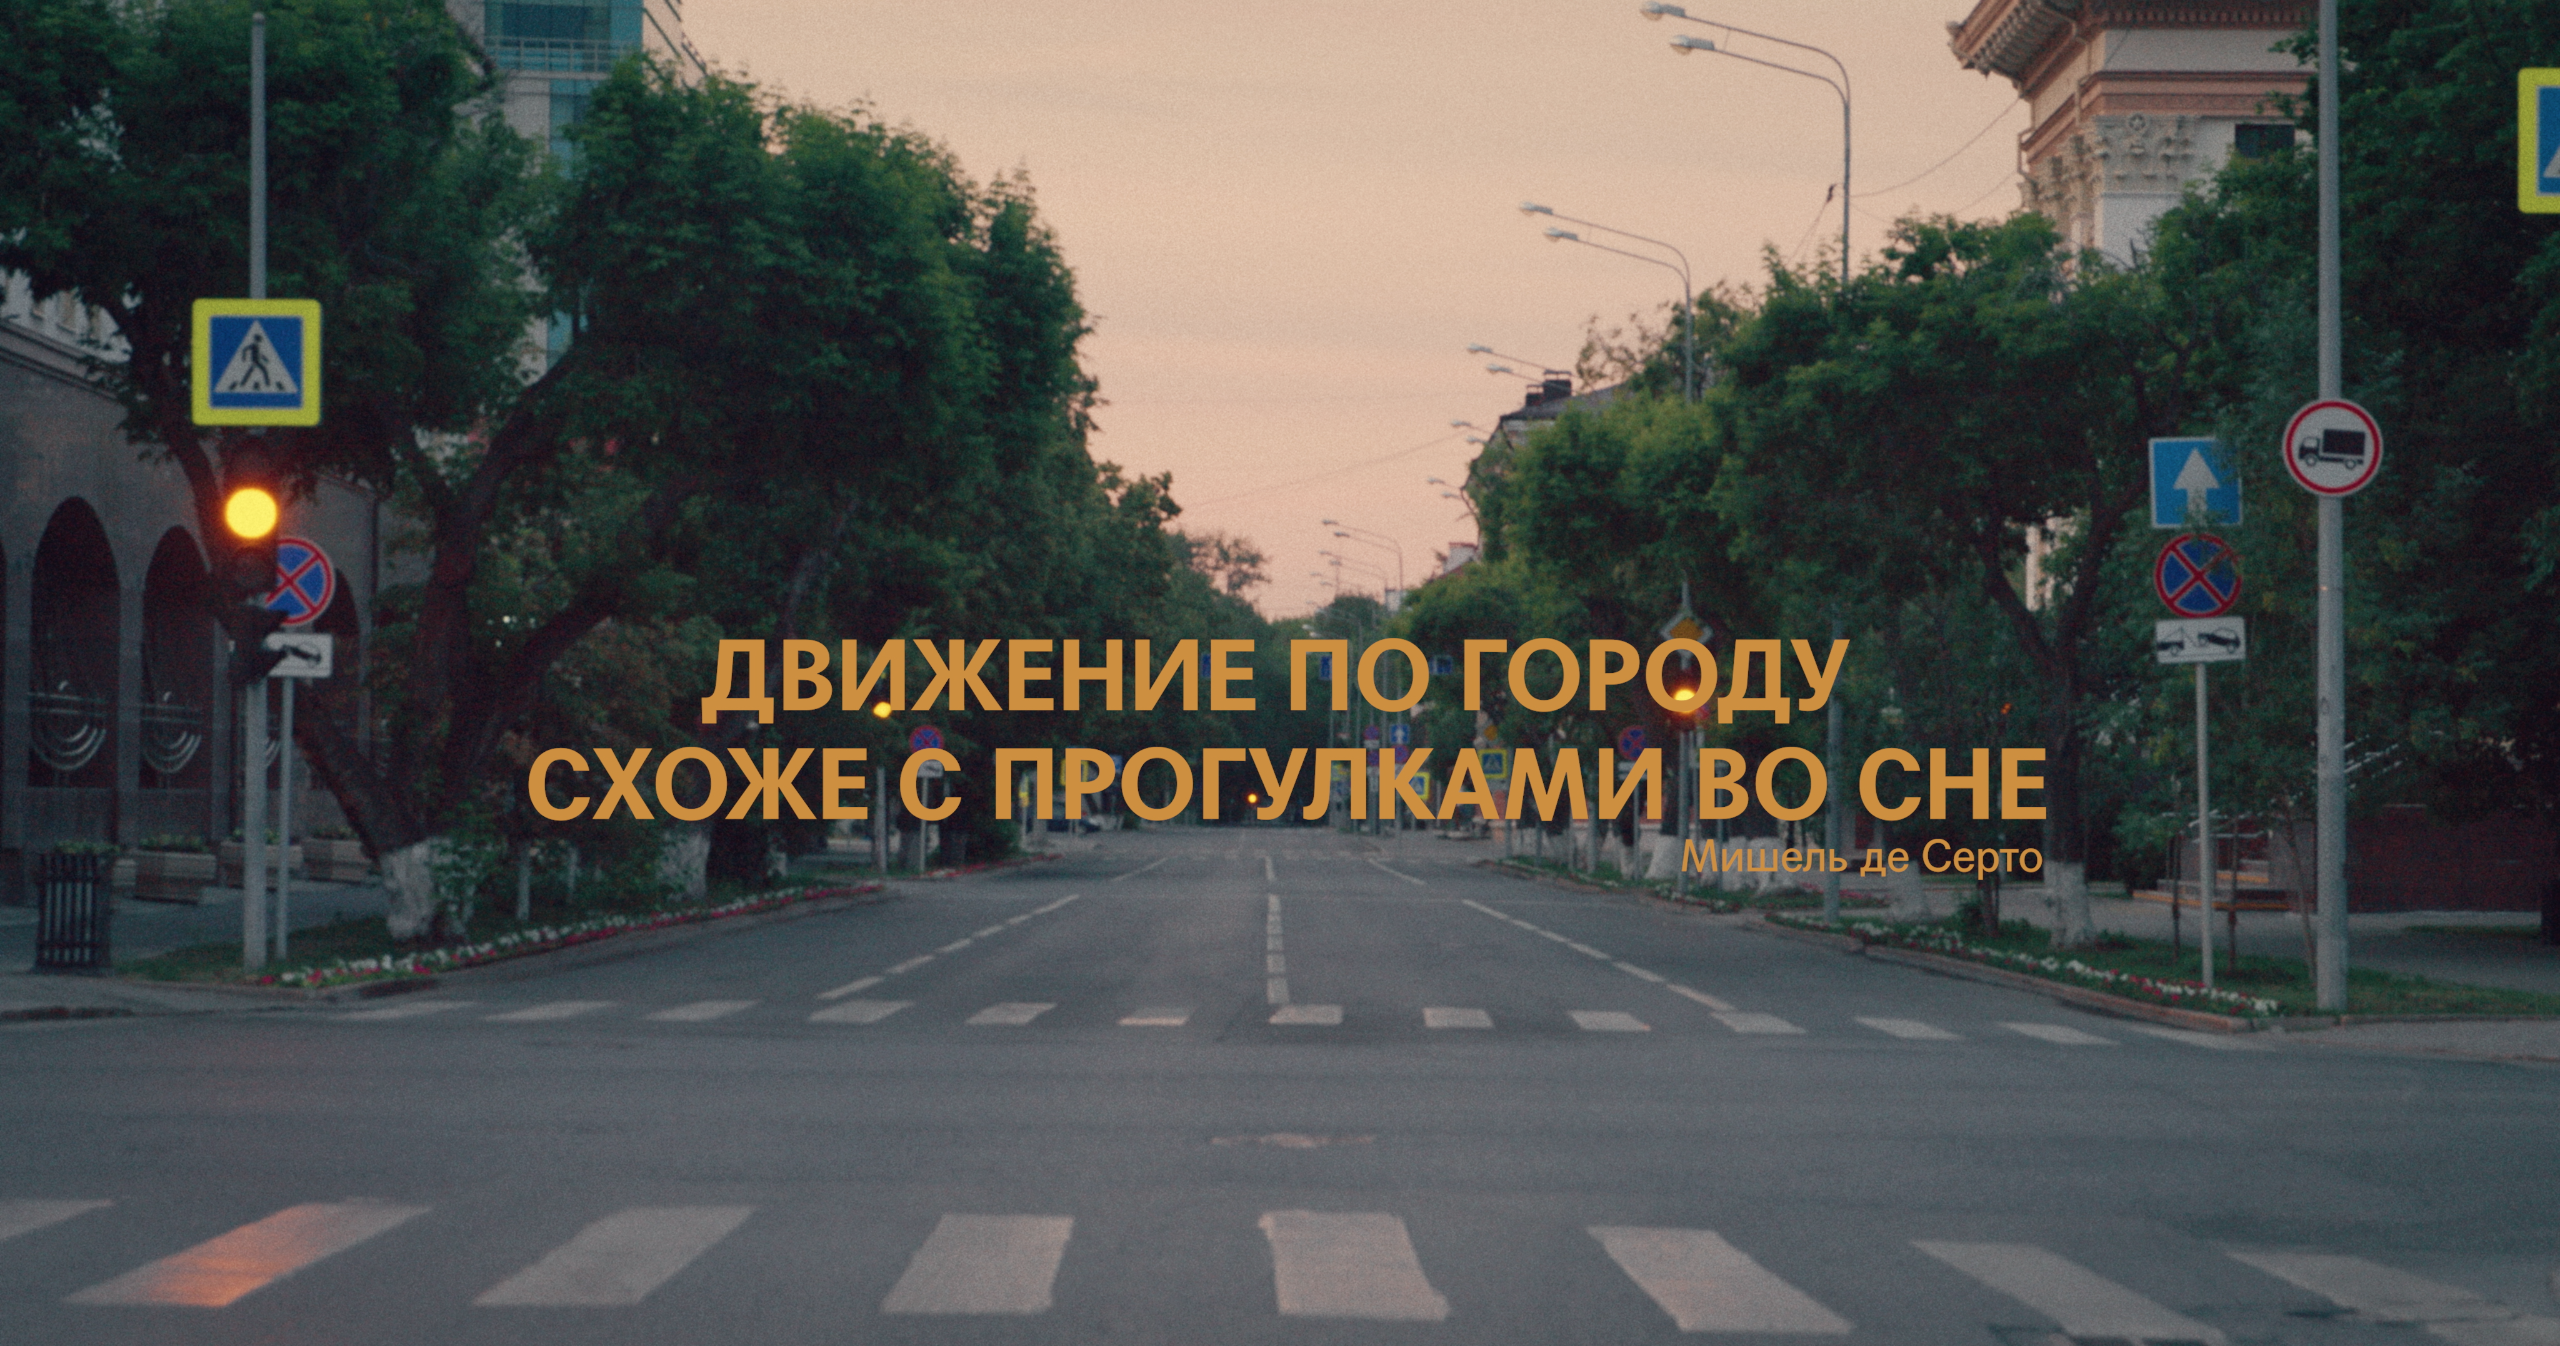 OTHER video about Tyumen